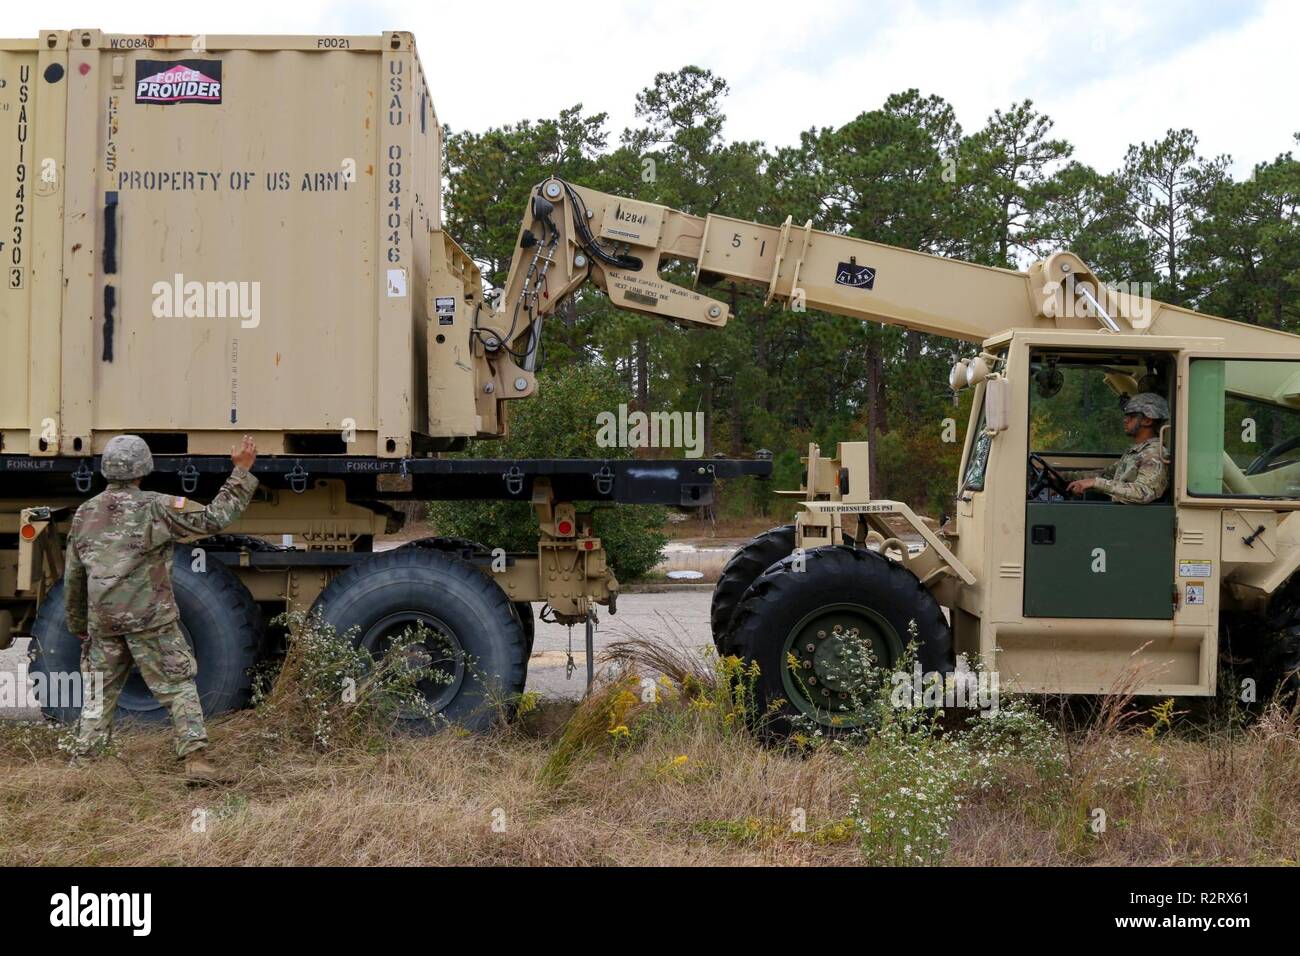 Spc. Steven Steedley (right), a 122nd Aviation Support Battalion, 82nd Combat Aviation Brigade, 82nd Airborne Division transportation specialist, moves a conex box with an All-Terrain Lifter, Army System II variable-reach forklift while Staff Sgt. Luis Gonzalez (left), a 122nd ASB, 82nd CAB, 82nd Abn. Div. transportation sergeant, ground guides on Nov. 1, 2018 at Fort Bragg, North Carolina. U.S. Northern Command is providing military support to the Department of Homeland Security and U.S. Customs and Border Protection to secure the southern border of the United States. Stock Photo